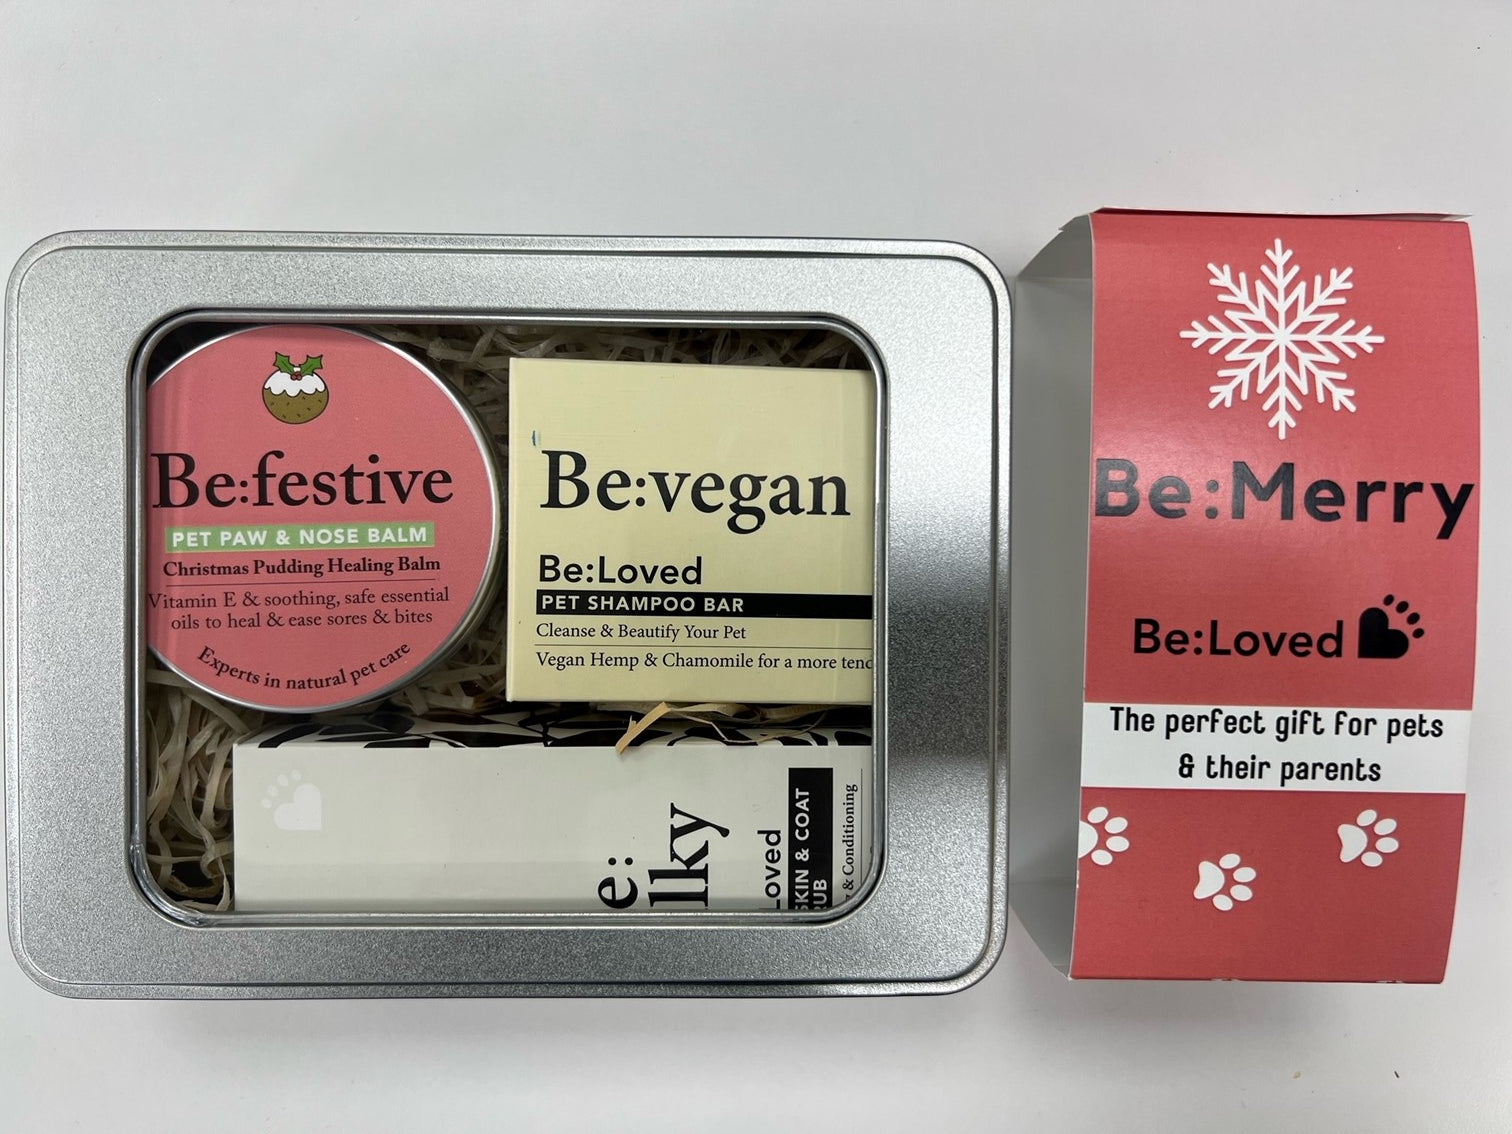 Be:Merry - A festive gift packed full of goodies for pets & their parents.